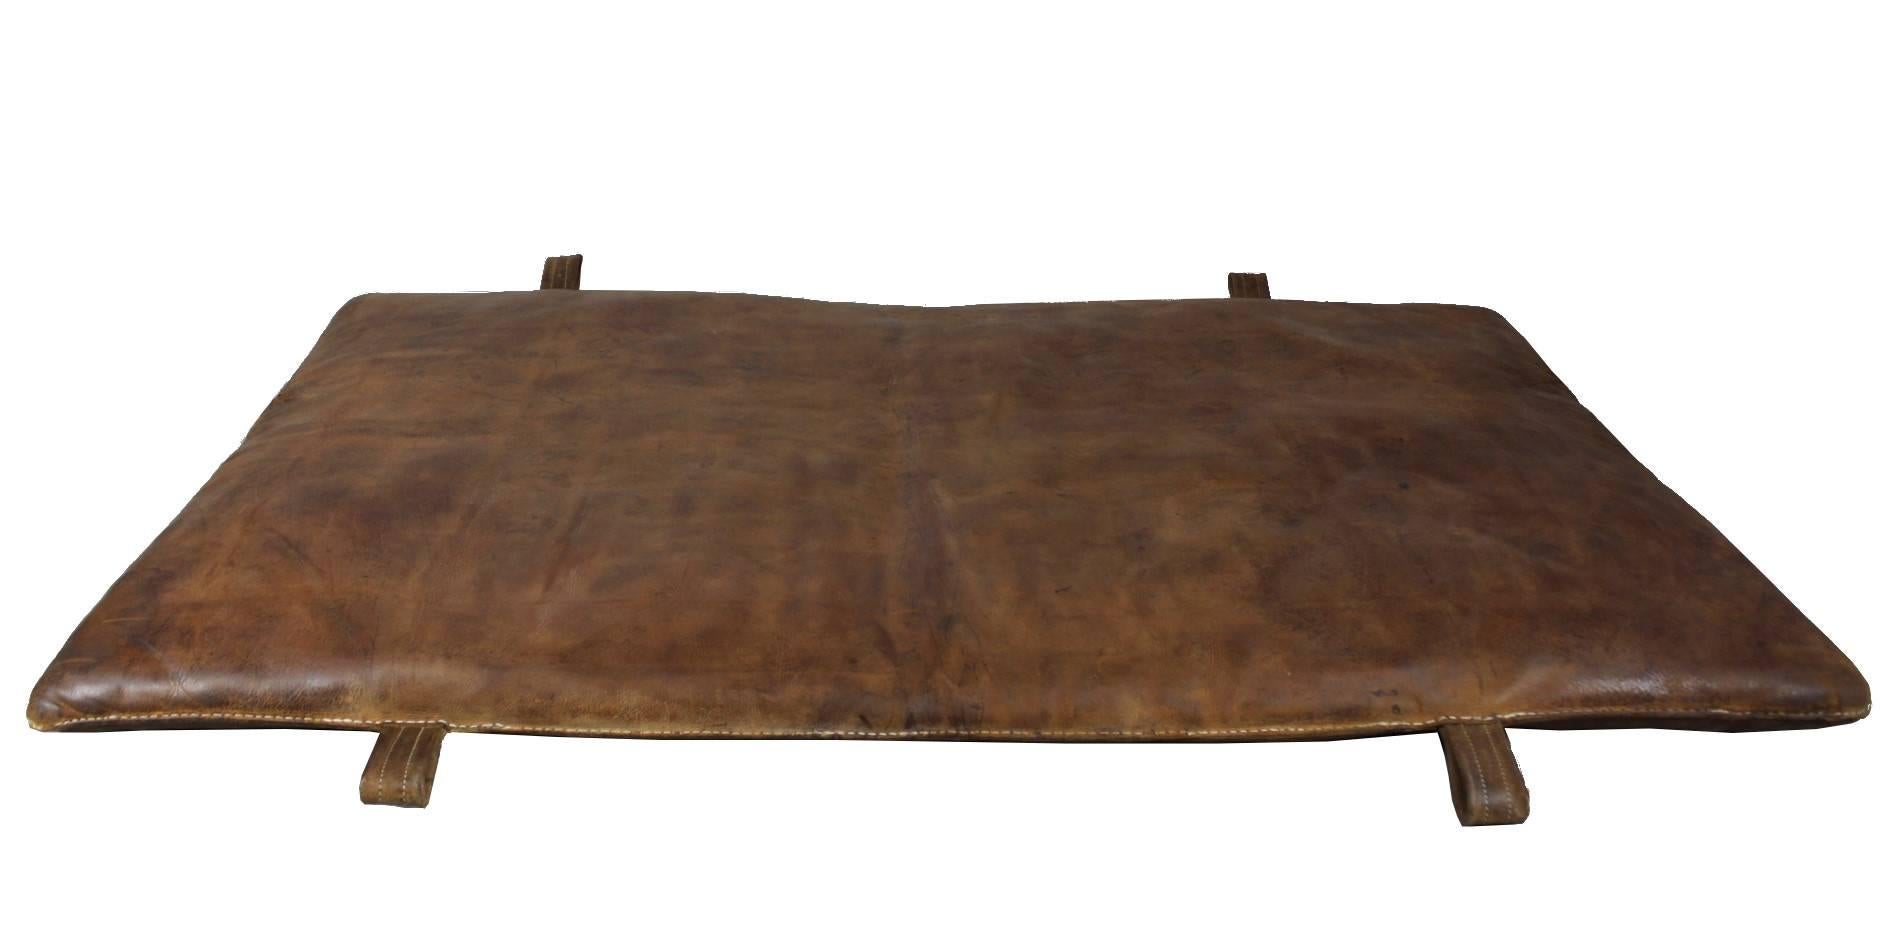 Leather gym mat from the 1930s, manufactured by Adam. The mat is in very good original condition with nice patina.